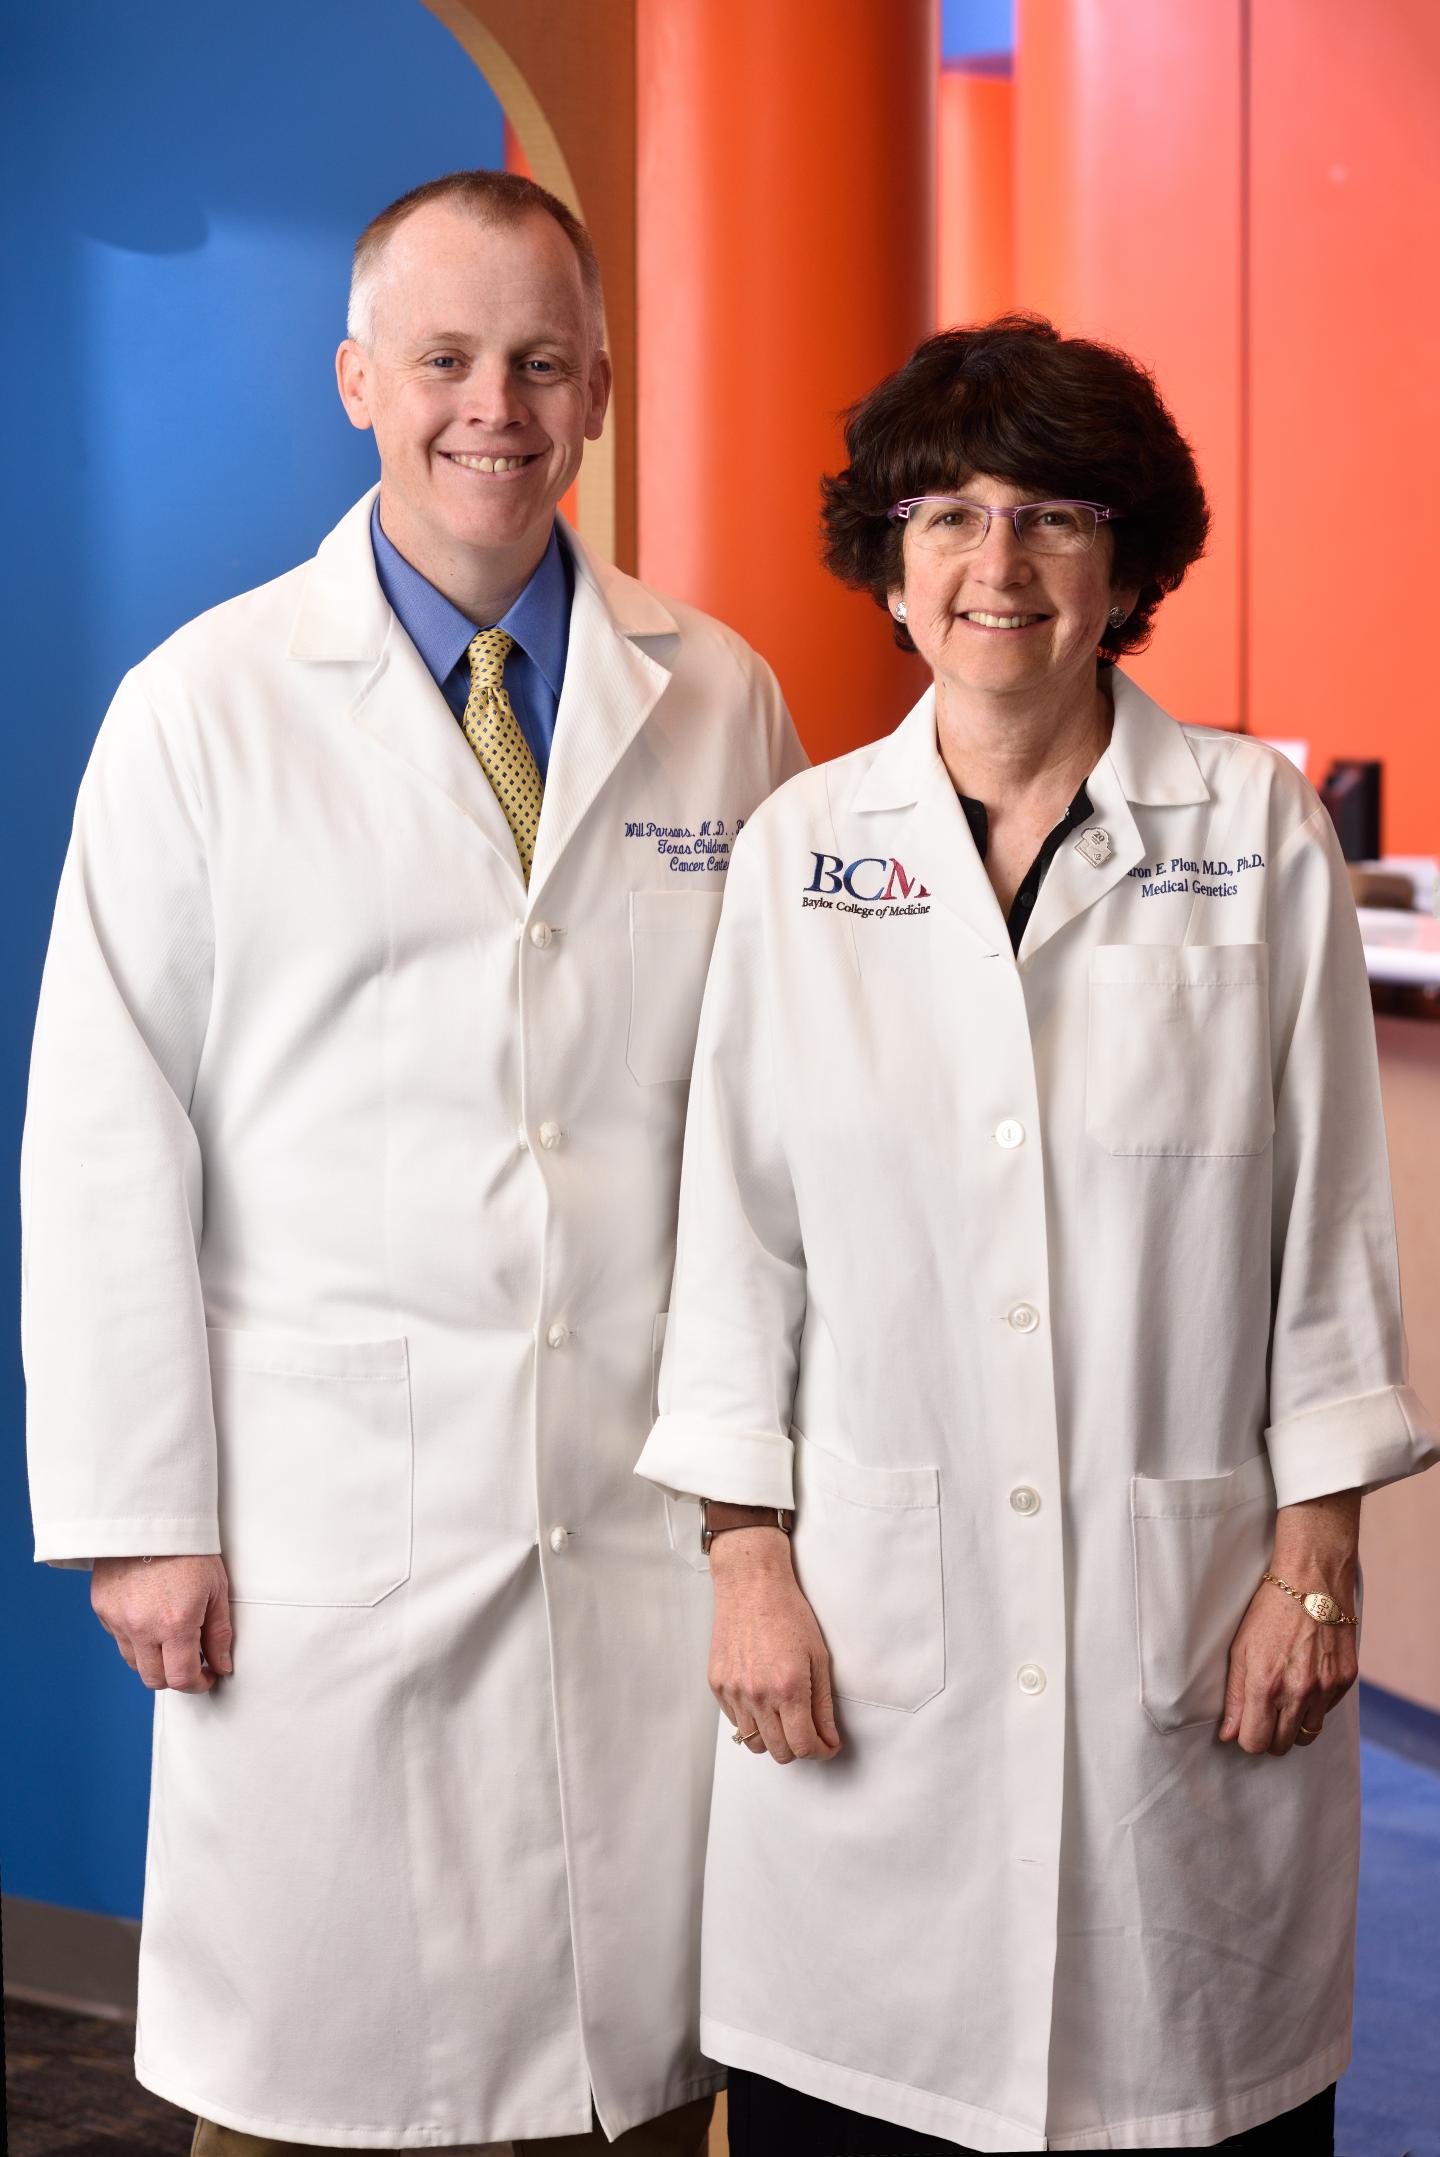 Dr. Sharon Plon and Dr. Will Parsons